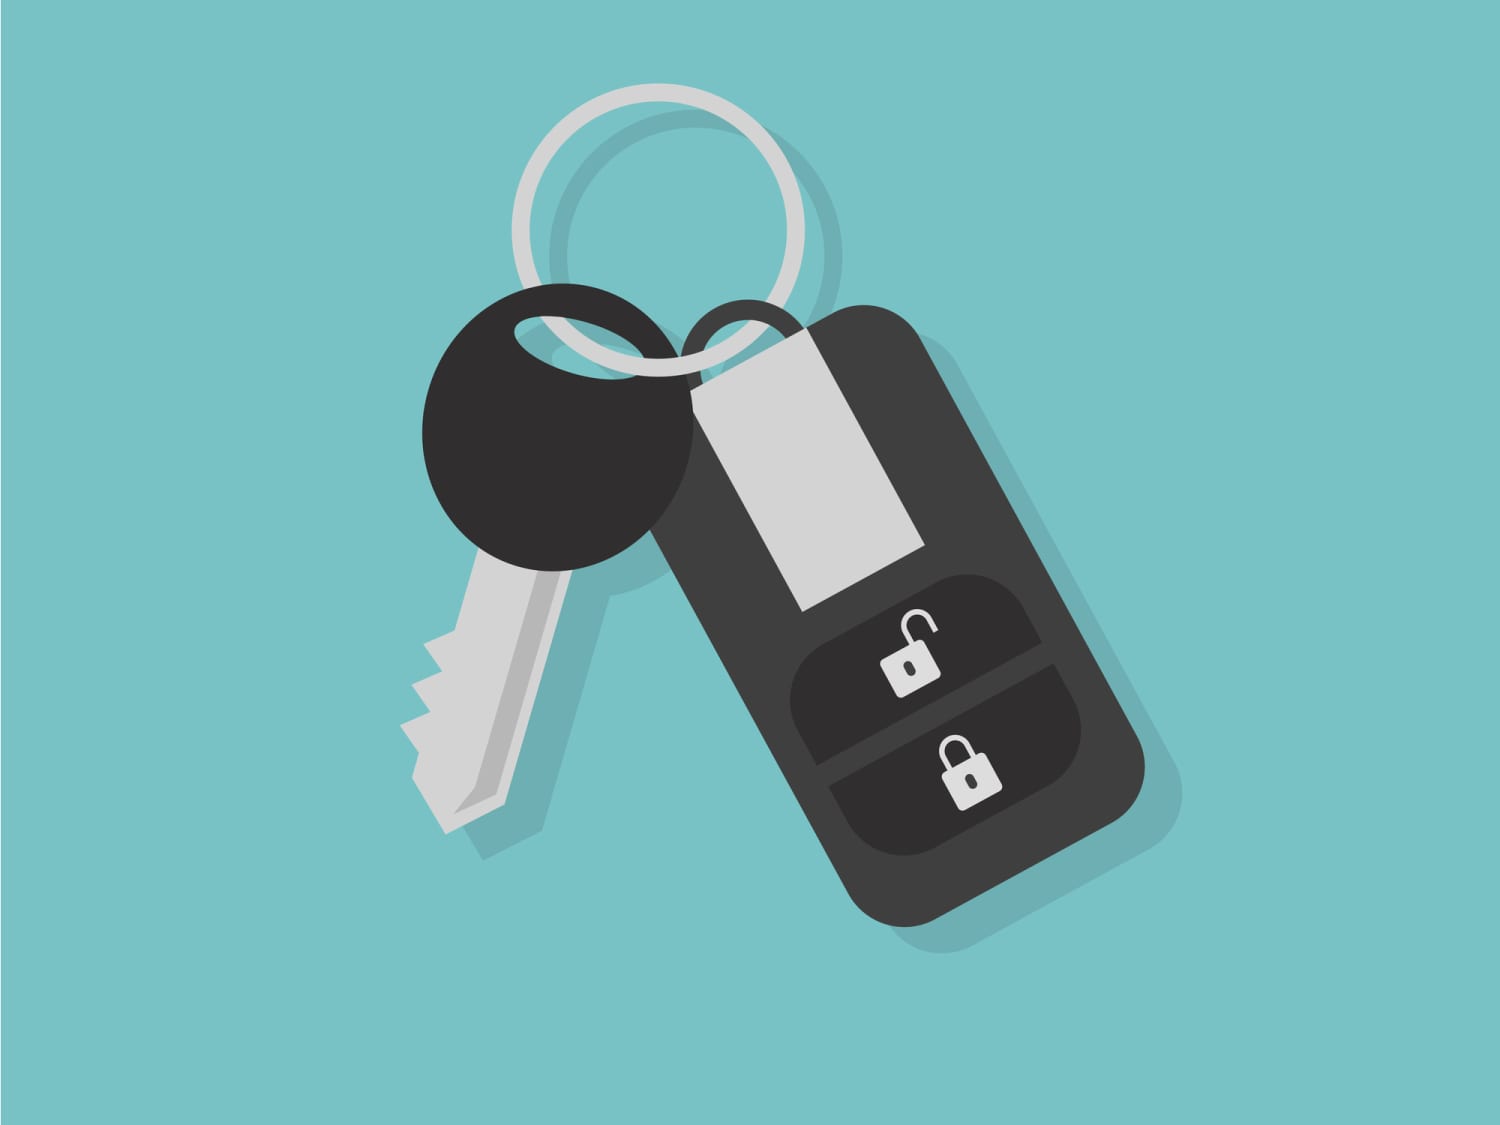 Can't find your car? Hold your key fob up to your head. (Really.) - Vox